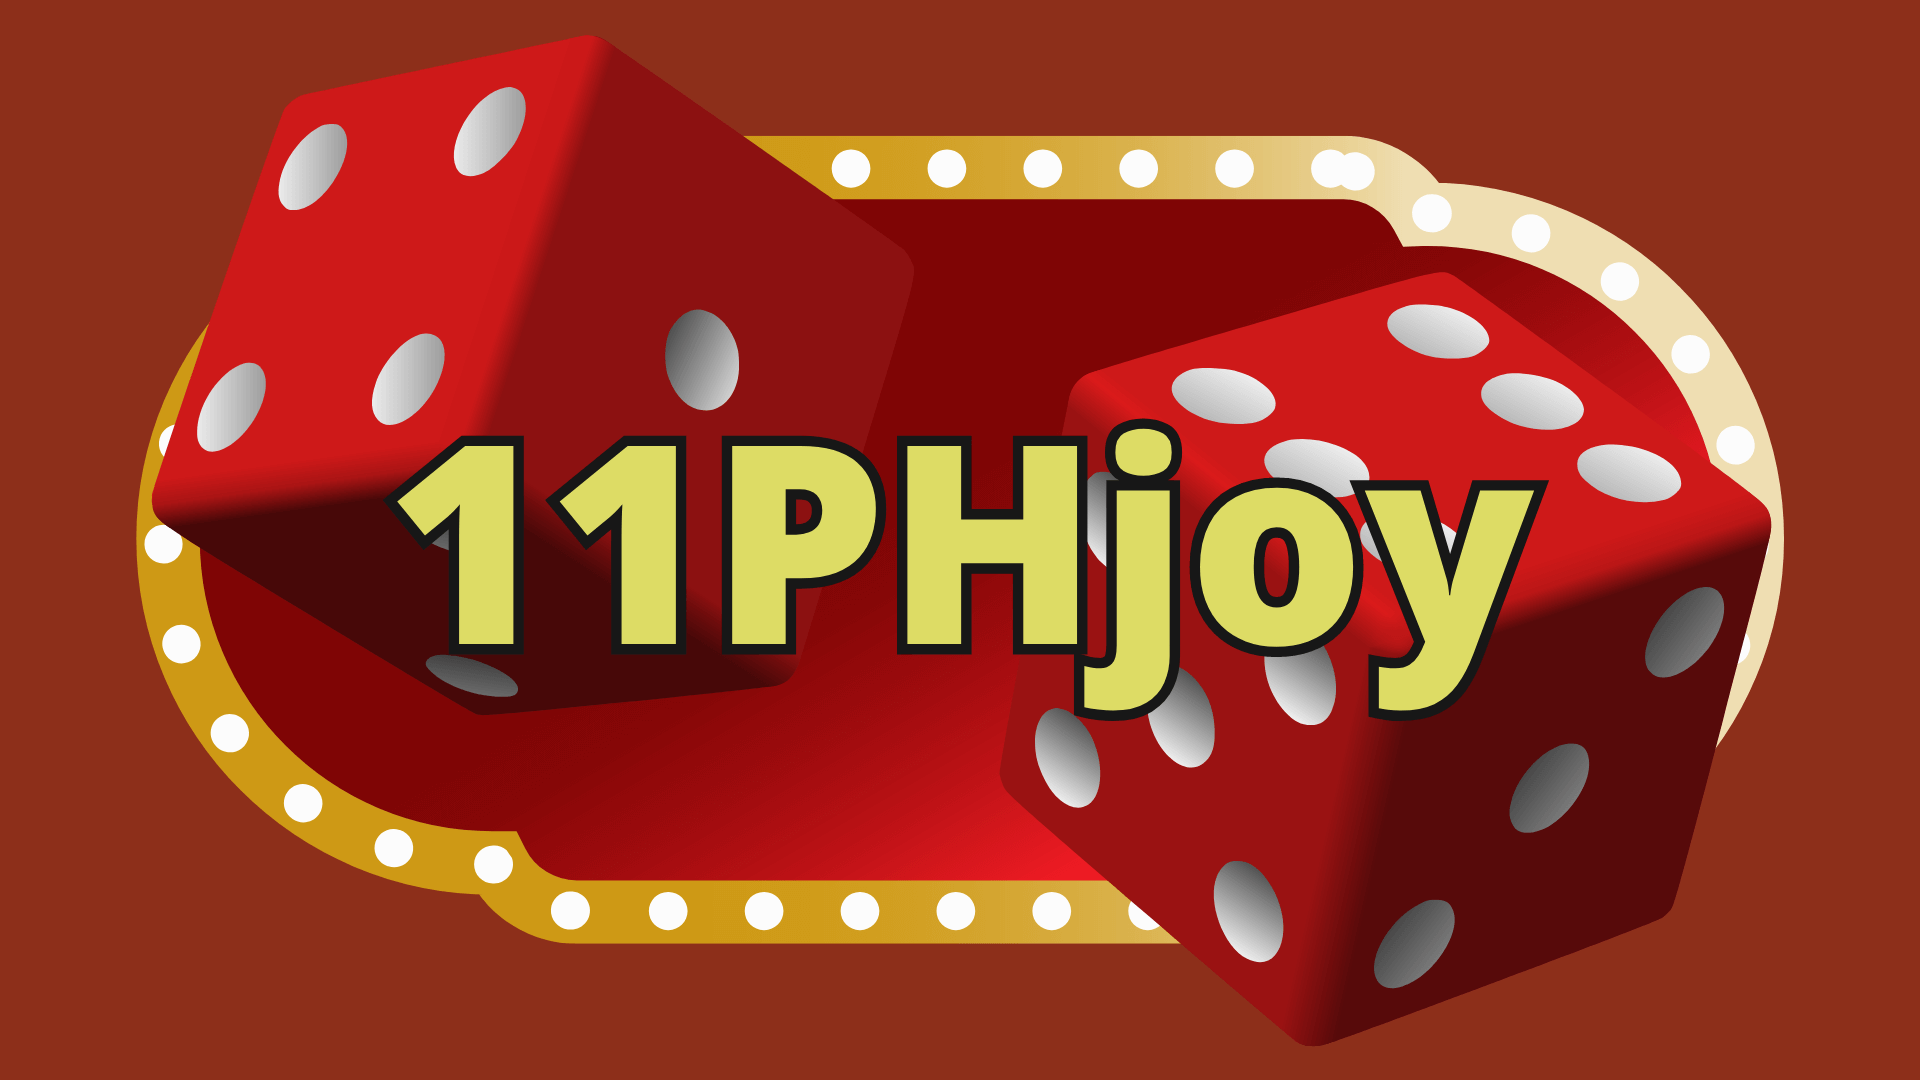 Read more about the article 11PHjoy Live